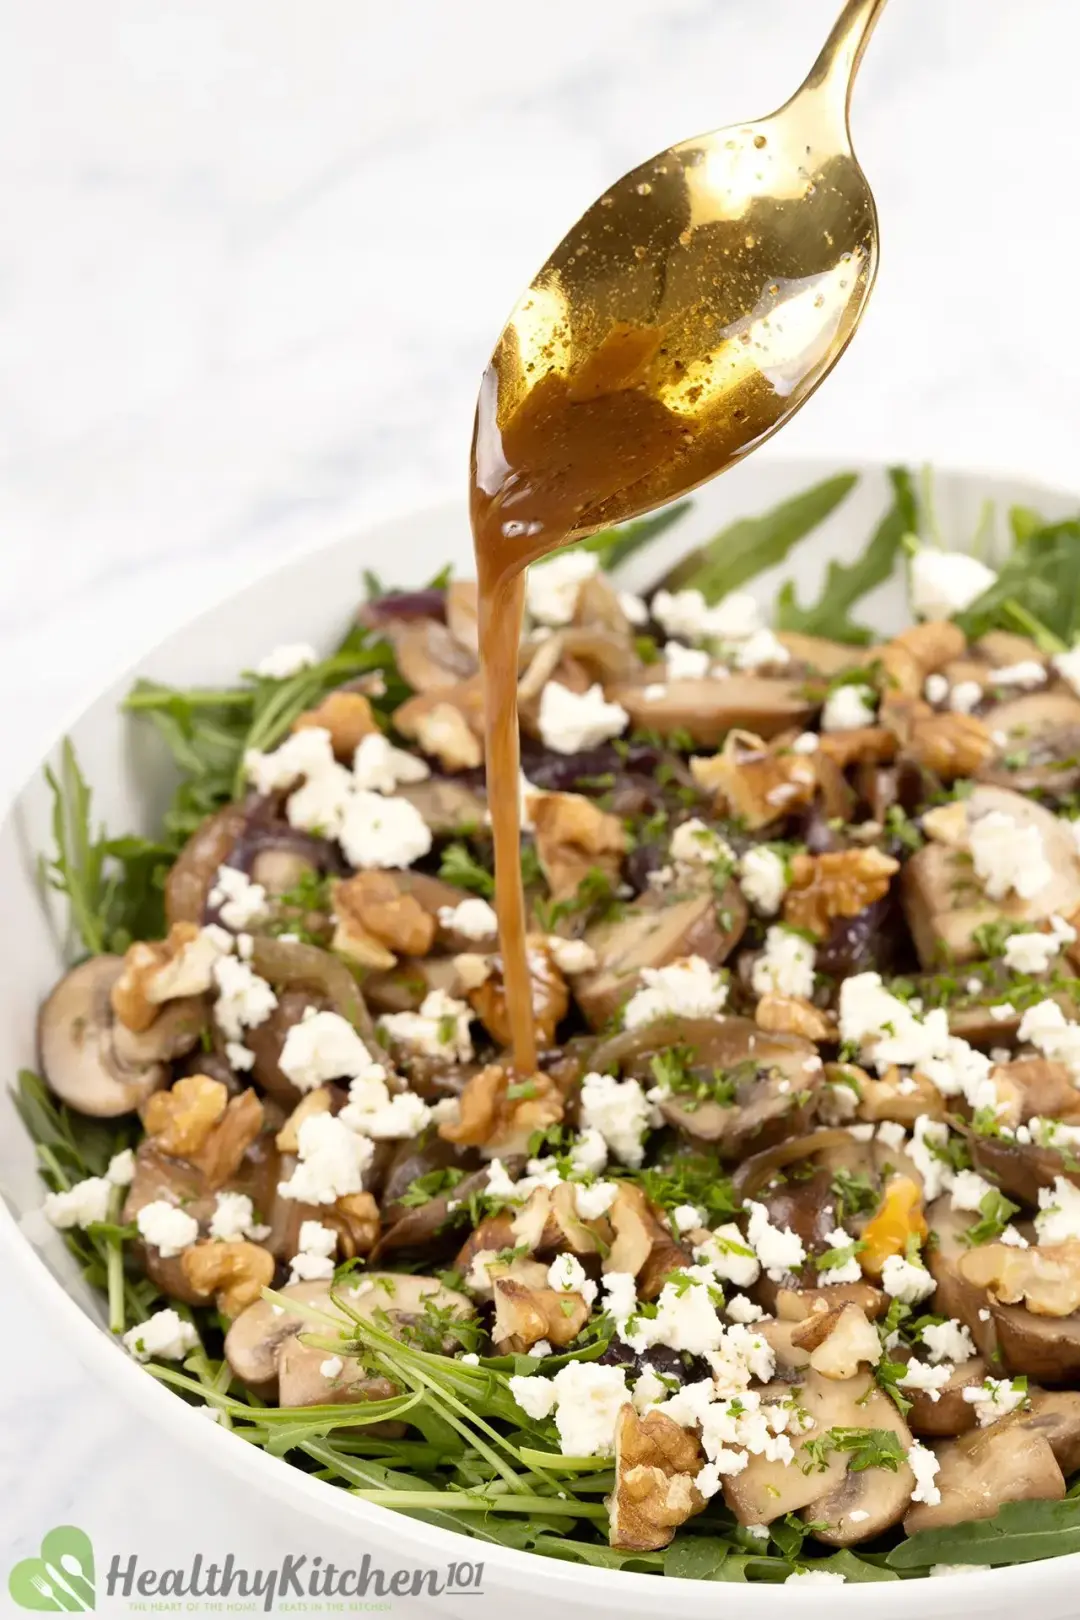 types of mushroom for this salad